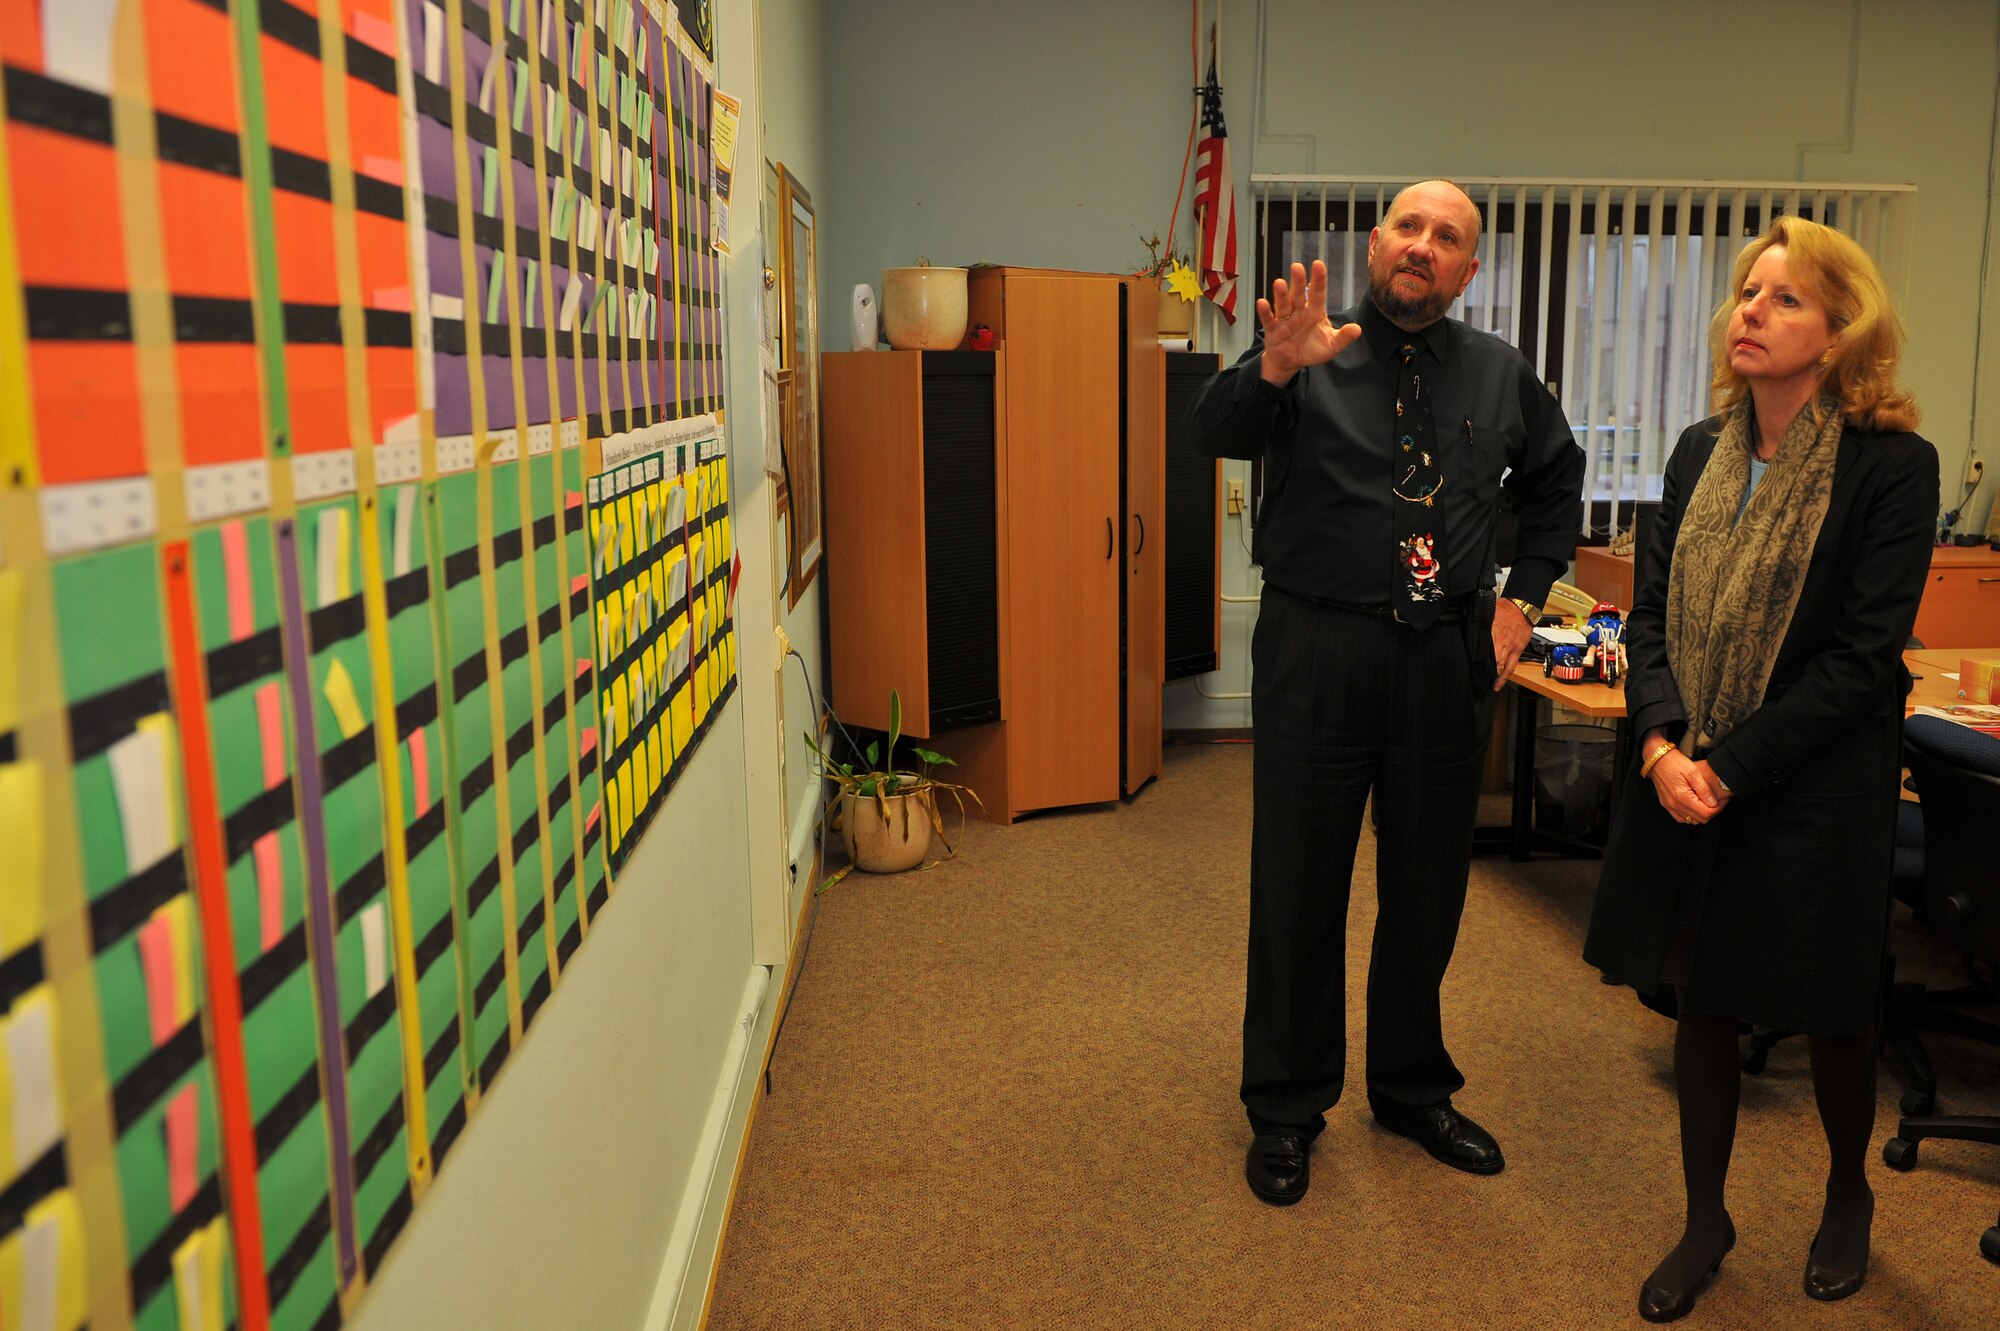 SPANGDAHLEM AIR BASE, Germany – Richard Alix, Spangdahlem Elementary School principal, discusses a data progress wall for students with Laura Stavridis, wife of U.S. Navy Adm. Jim Stavridis, U.S. European Command commander and Supreme Allied Commander Europe, during a familiarization tour here Dec. 14.  The school uses the progress wall to track students’ academic progress throughout the year so teachers can provide more accurate and detailed instruction. (U.S. Air Force photo/Tech. Sgt. Jonathan Pomeroy)